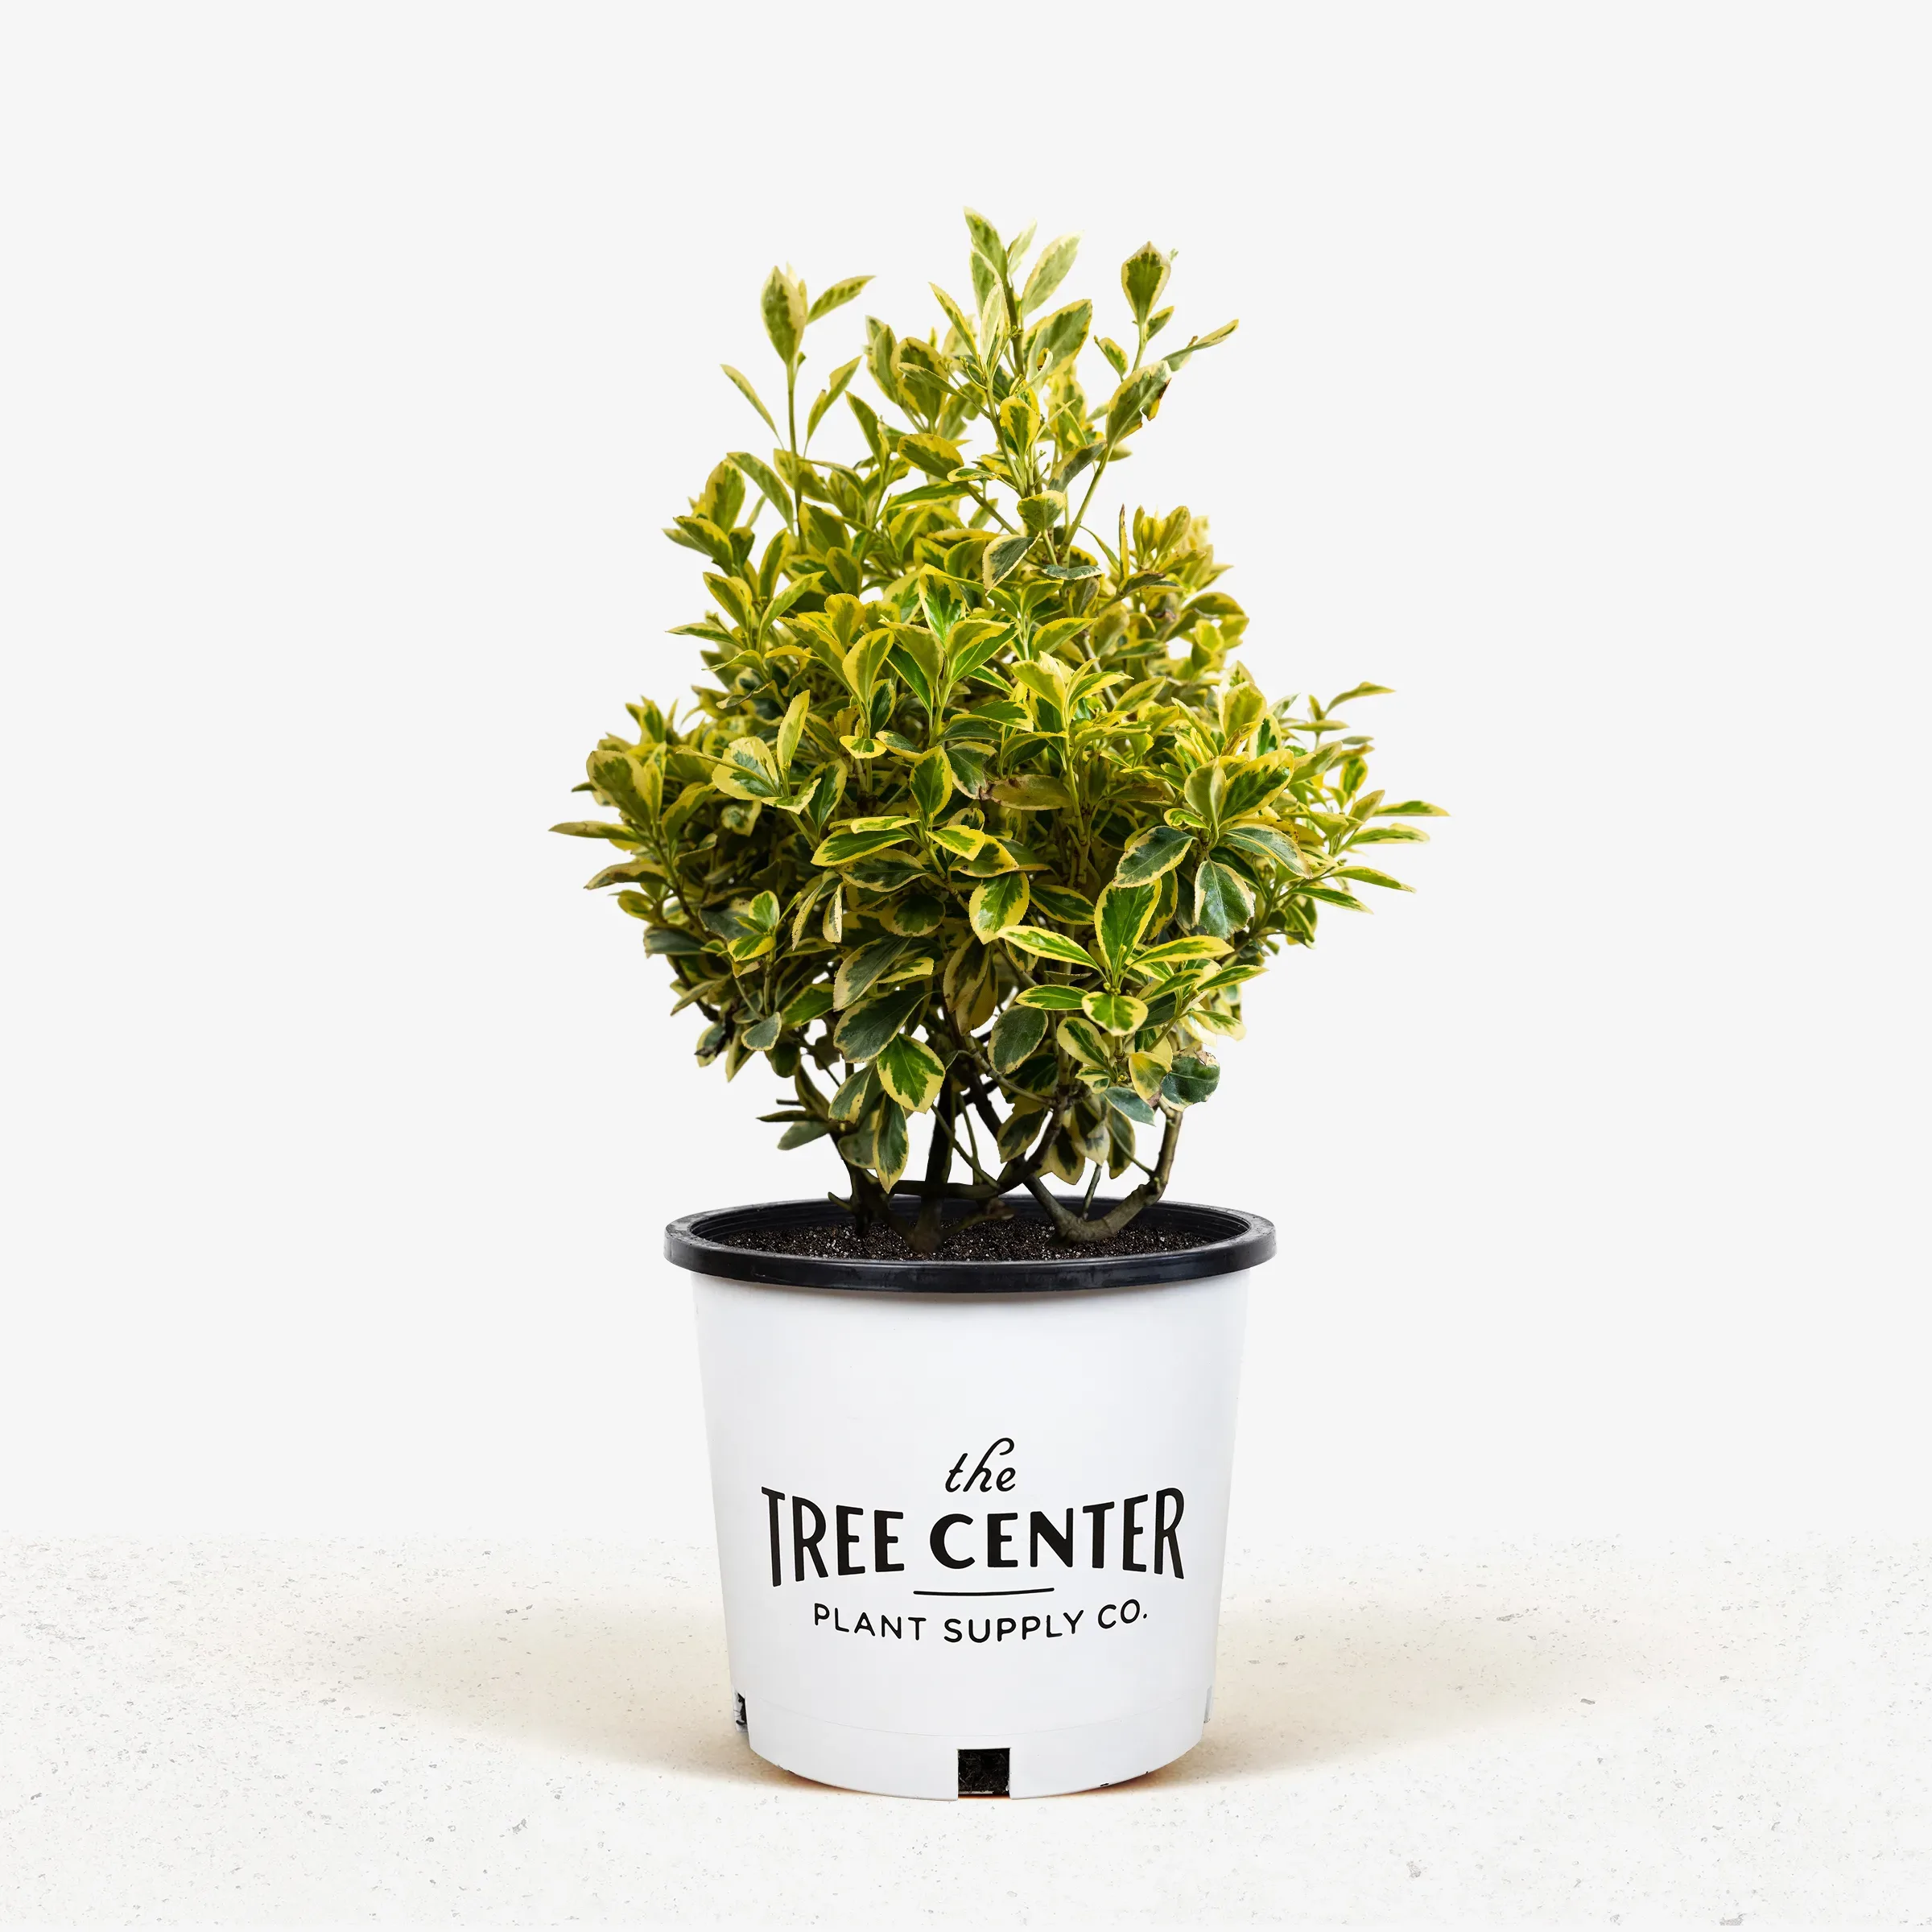 Image of Euonymus fortunei Silver Queen plant in container